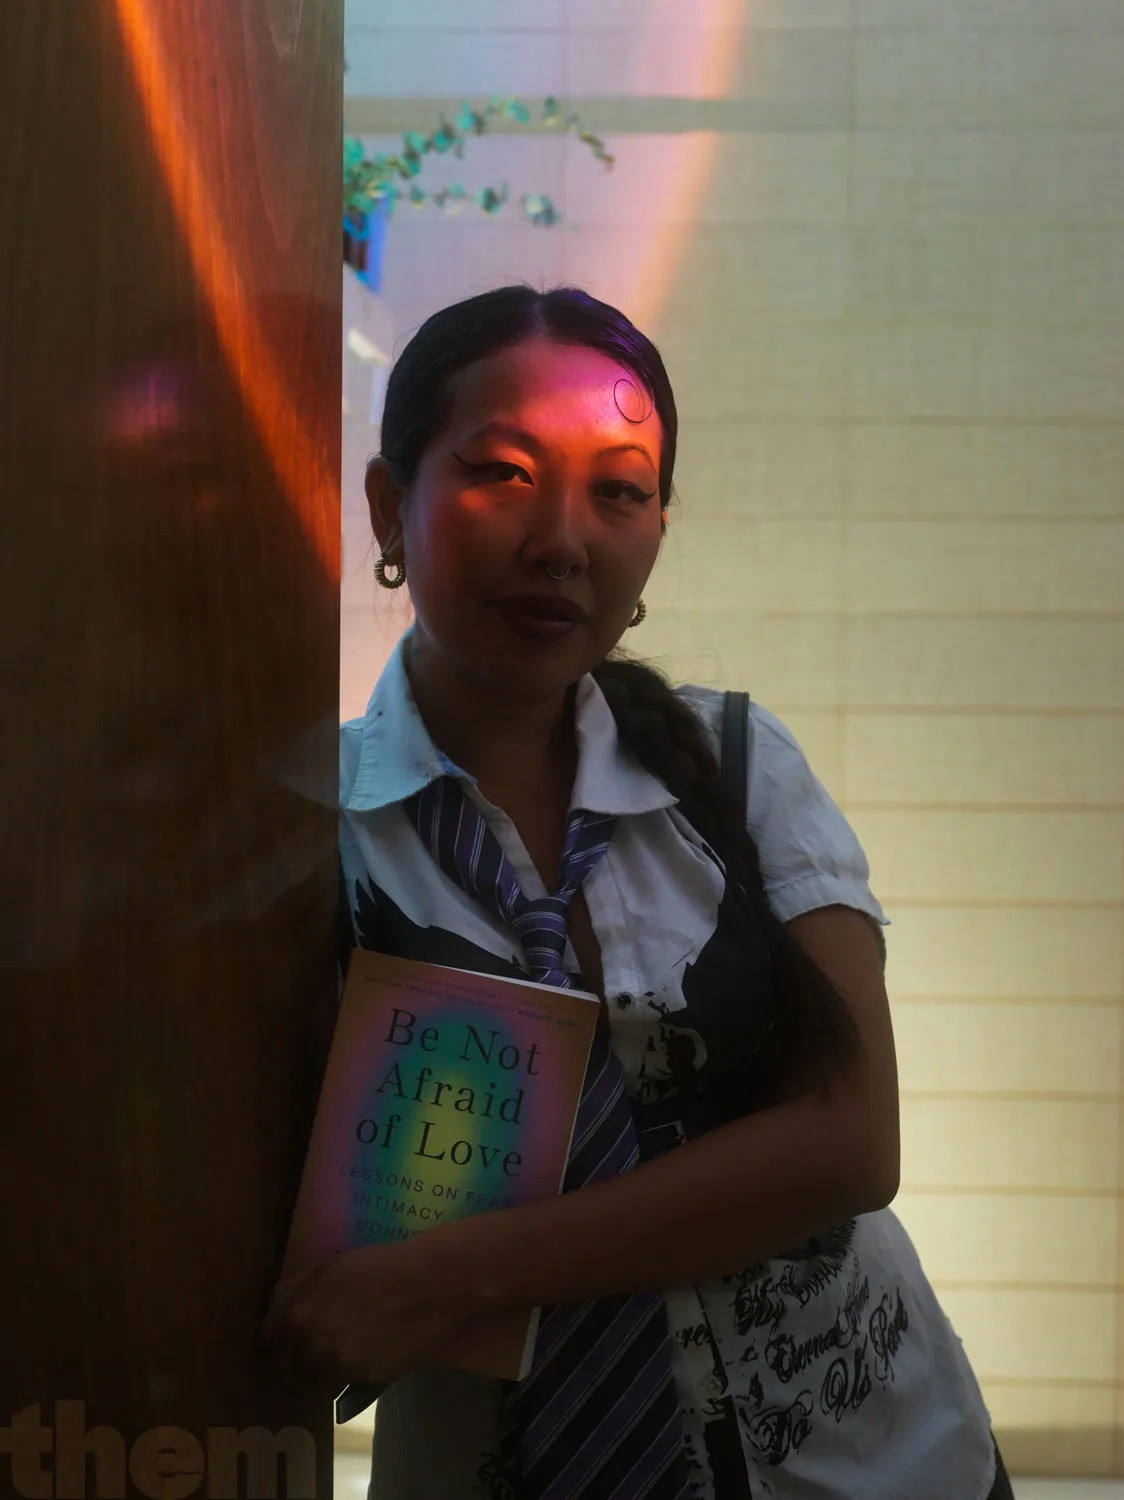 Mimi Zhu holding Be Not Afraid Of Love the book as pink light hits their face.